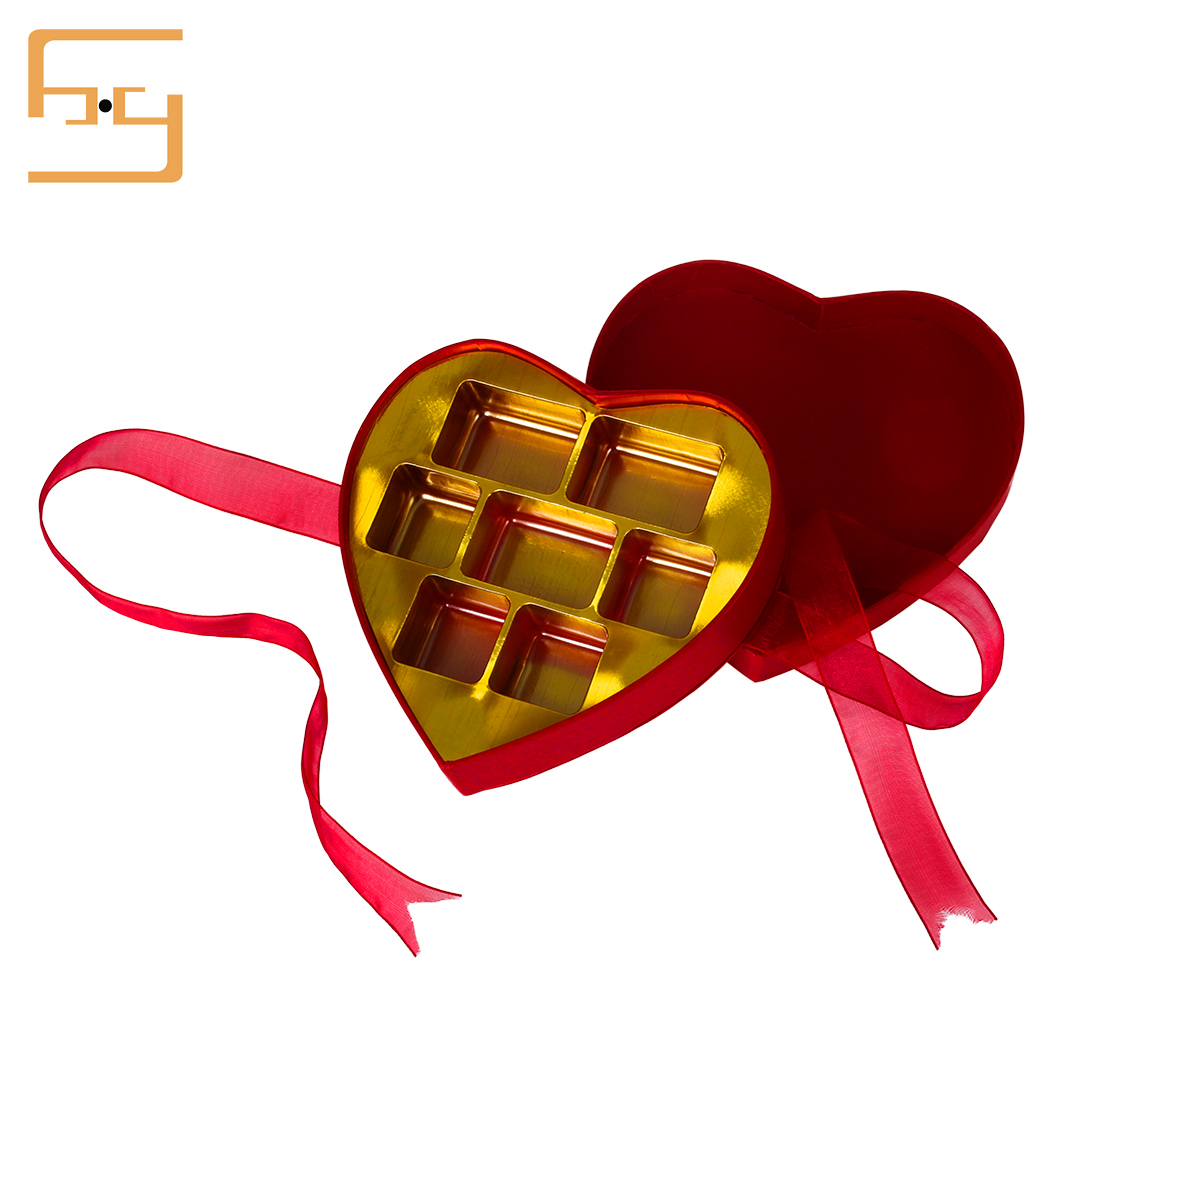 Wholesale Heart Shape Plastic Box For Chocolate Box Packaging